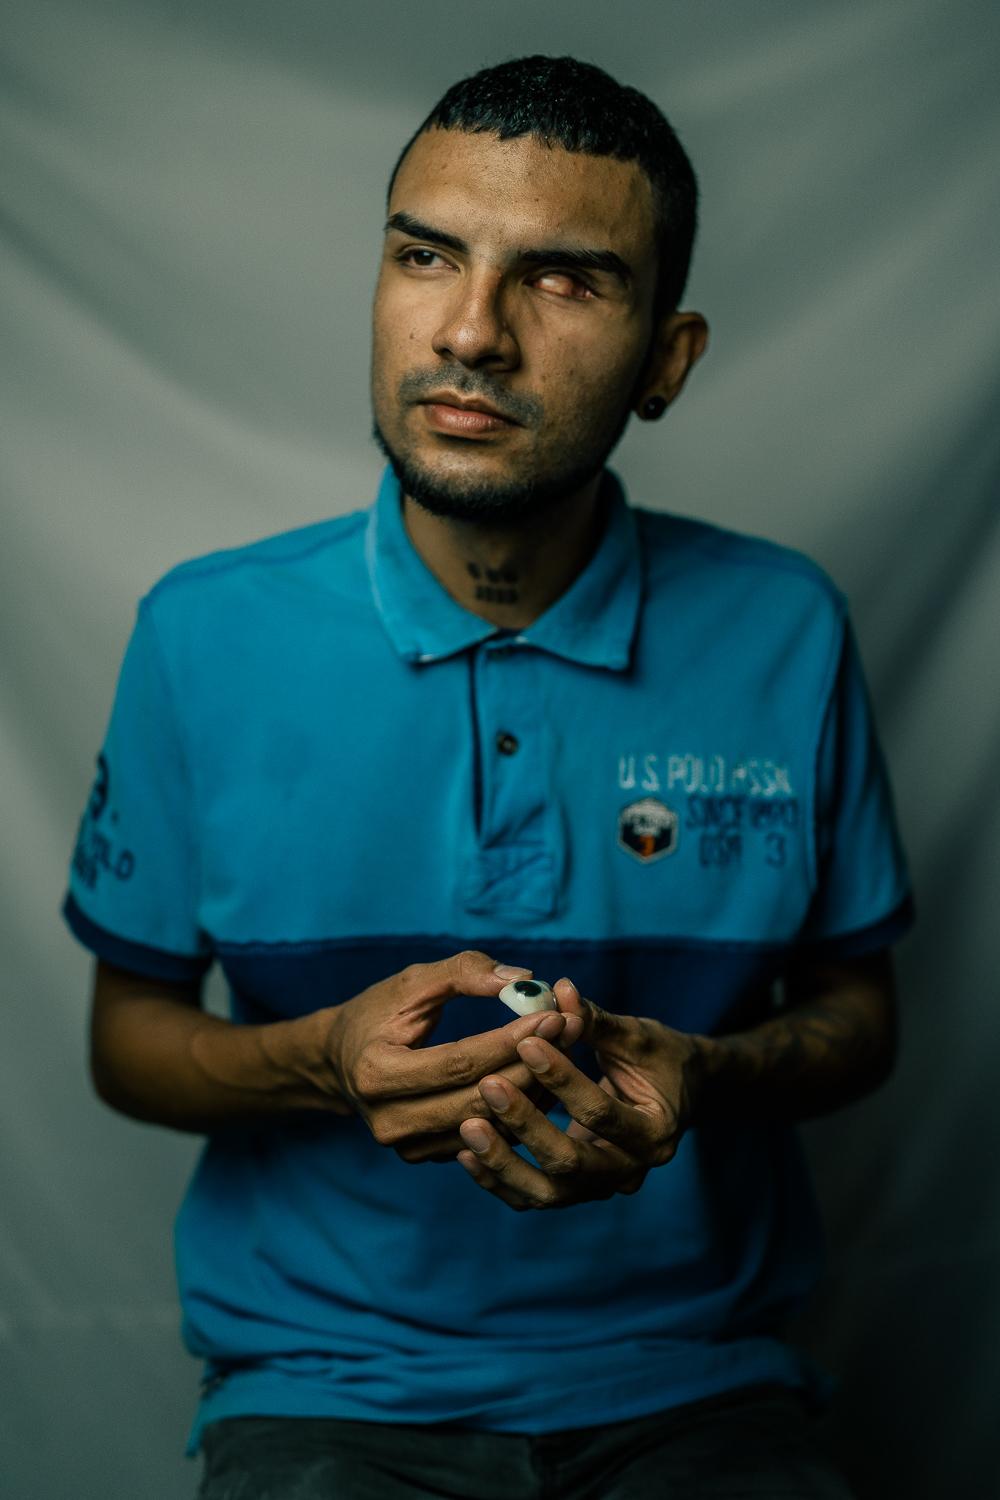 The Washington Post: Resistencia  - Giovanny poses with his prosthetic eye in Cali, Colombia.  In April of 2021, Giovanny lost his...